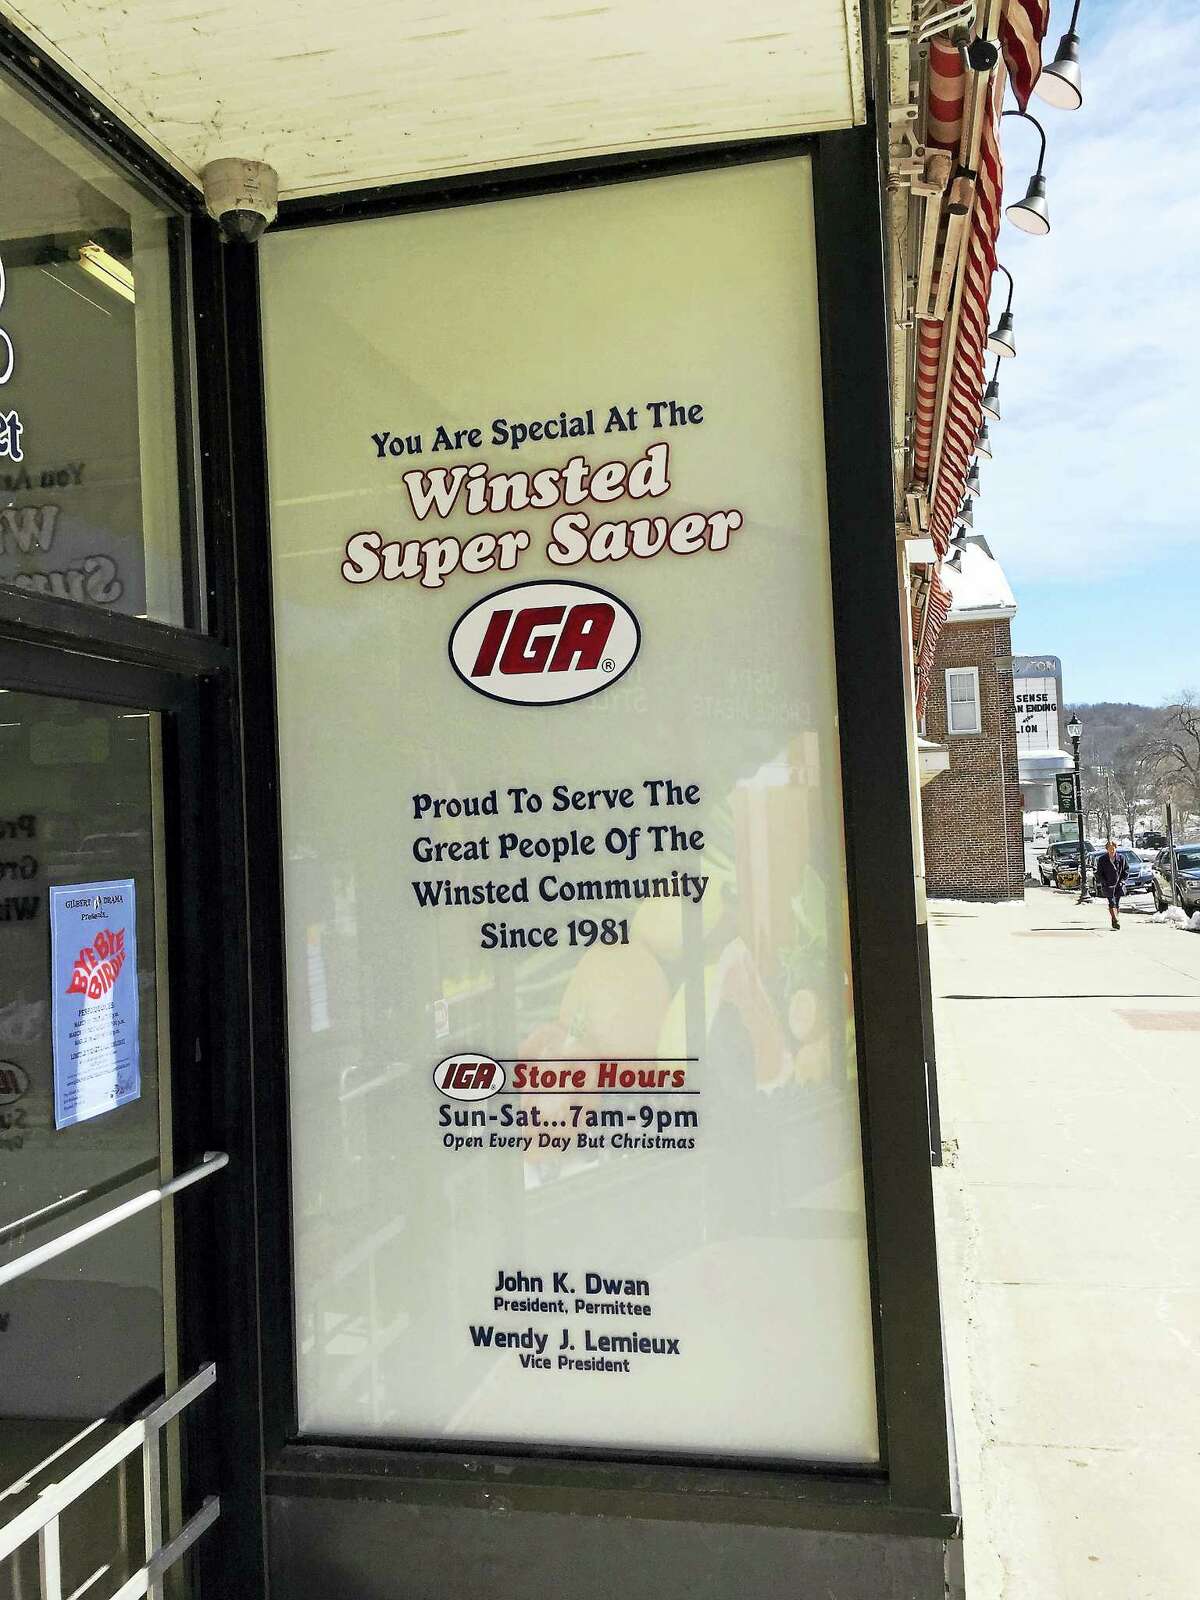 The IGA Winsted Super Saver on Main Street has been in business for decades.